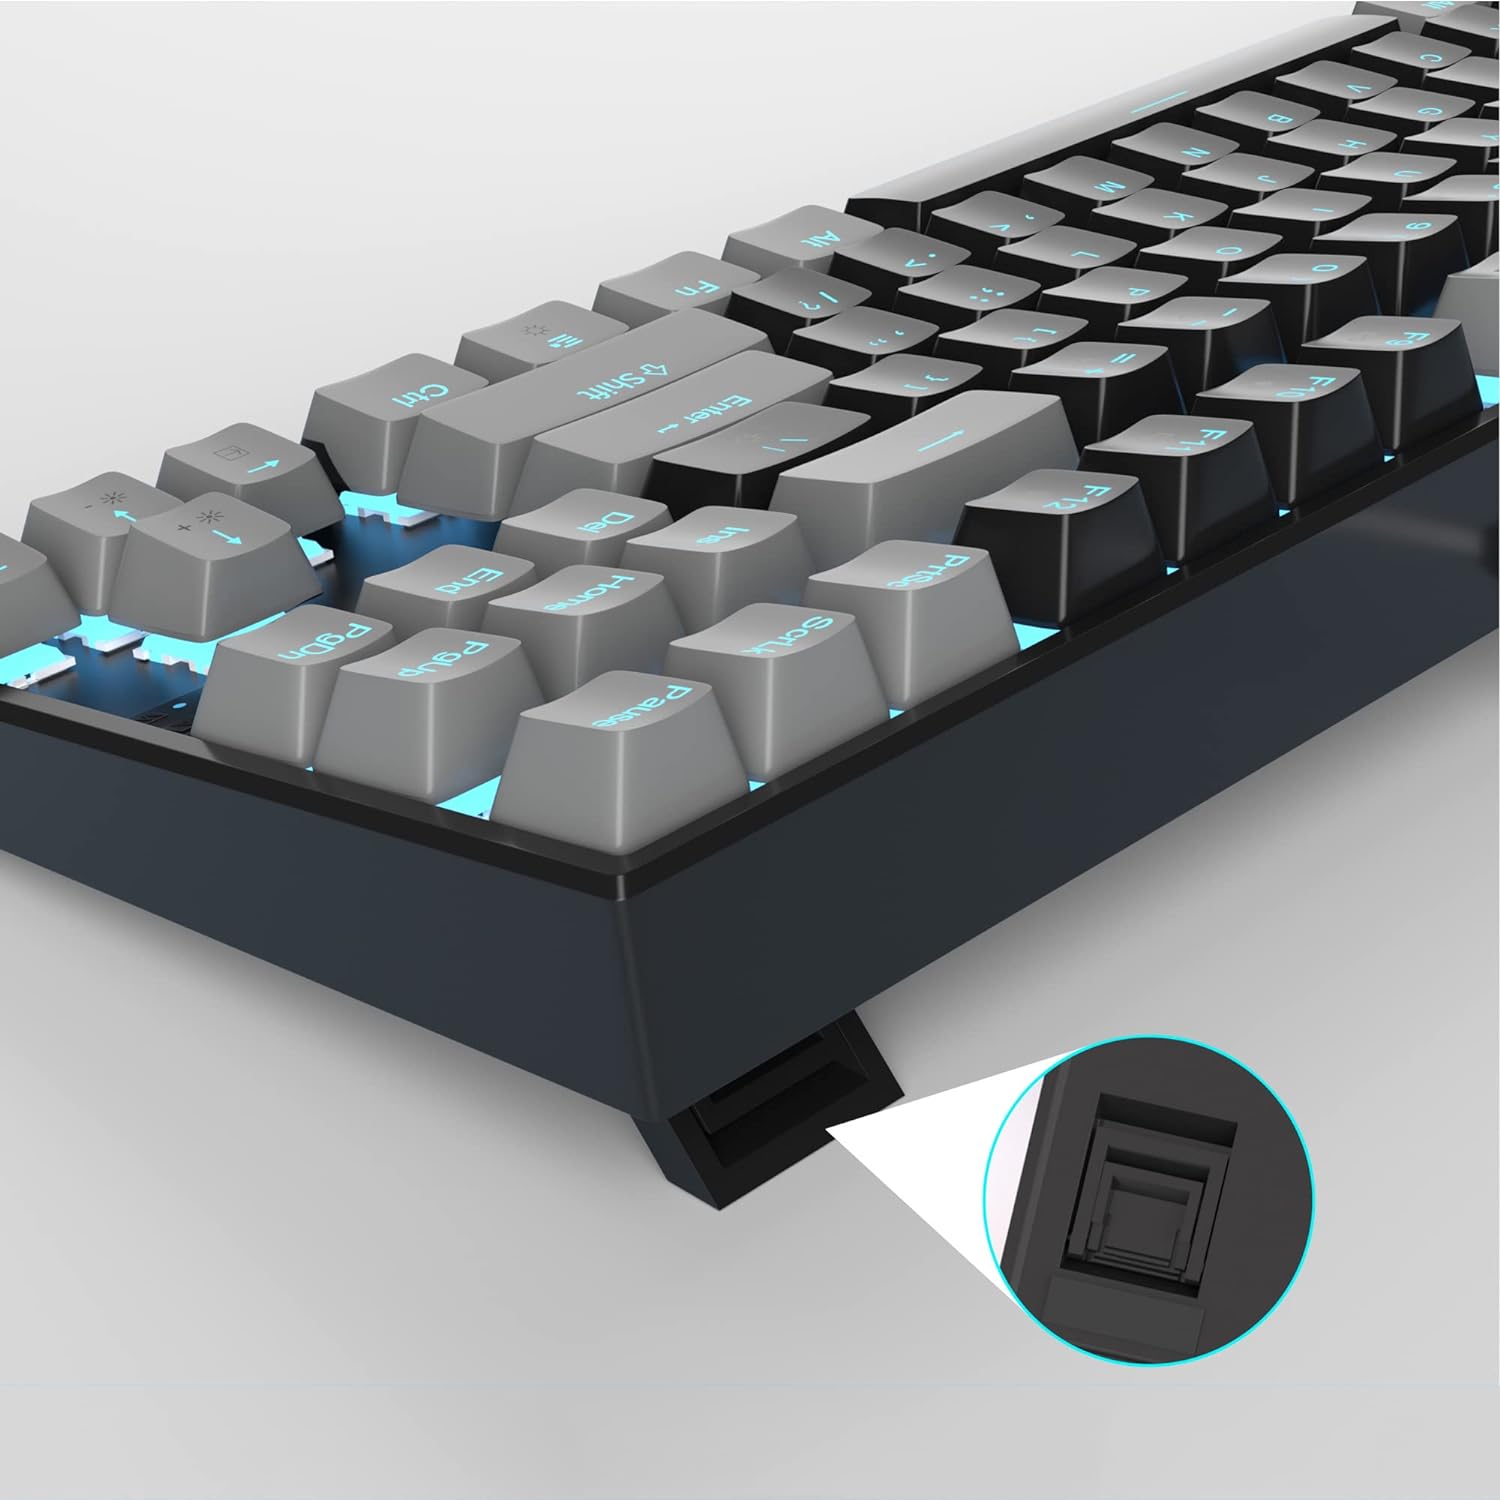 Mechanical Gaming Keyboard LED Backlit Compact TKL Wired